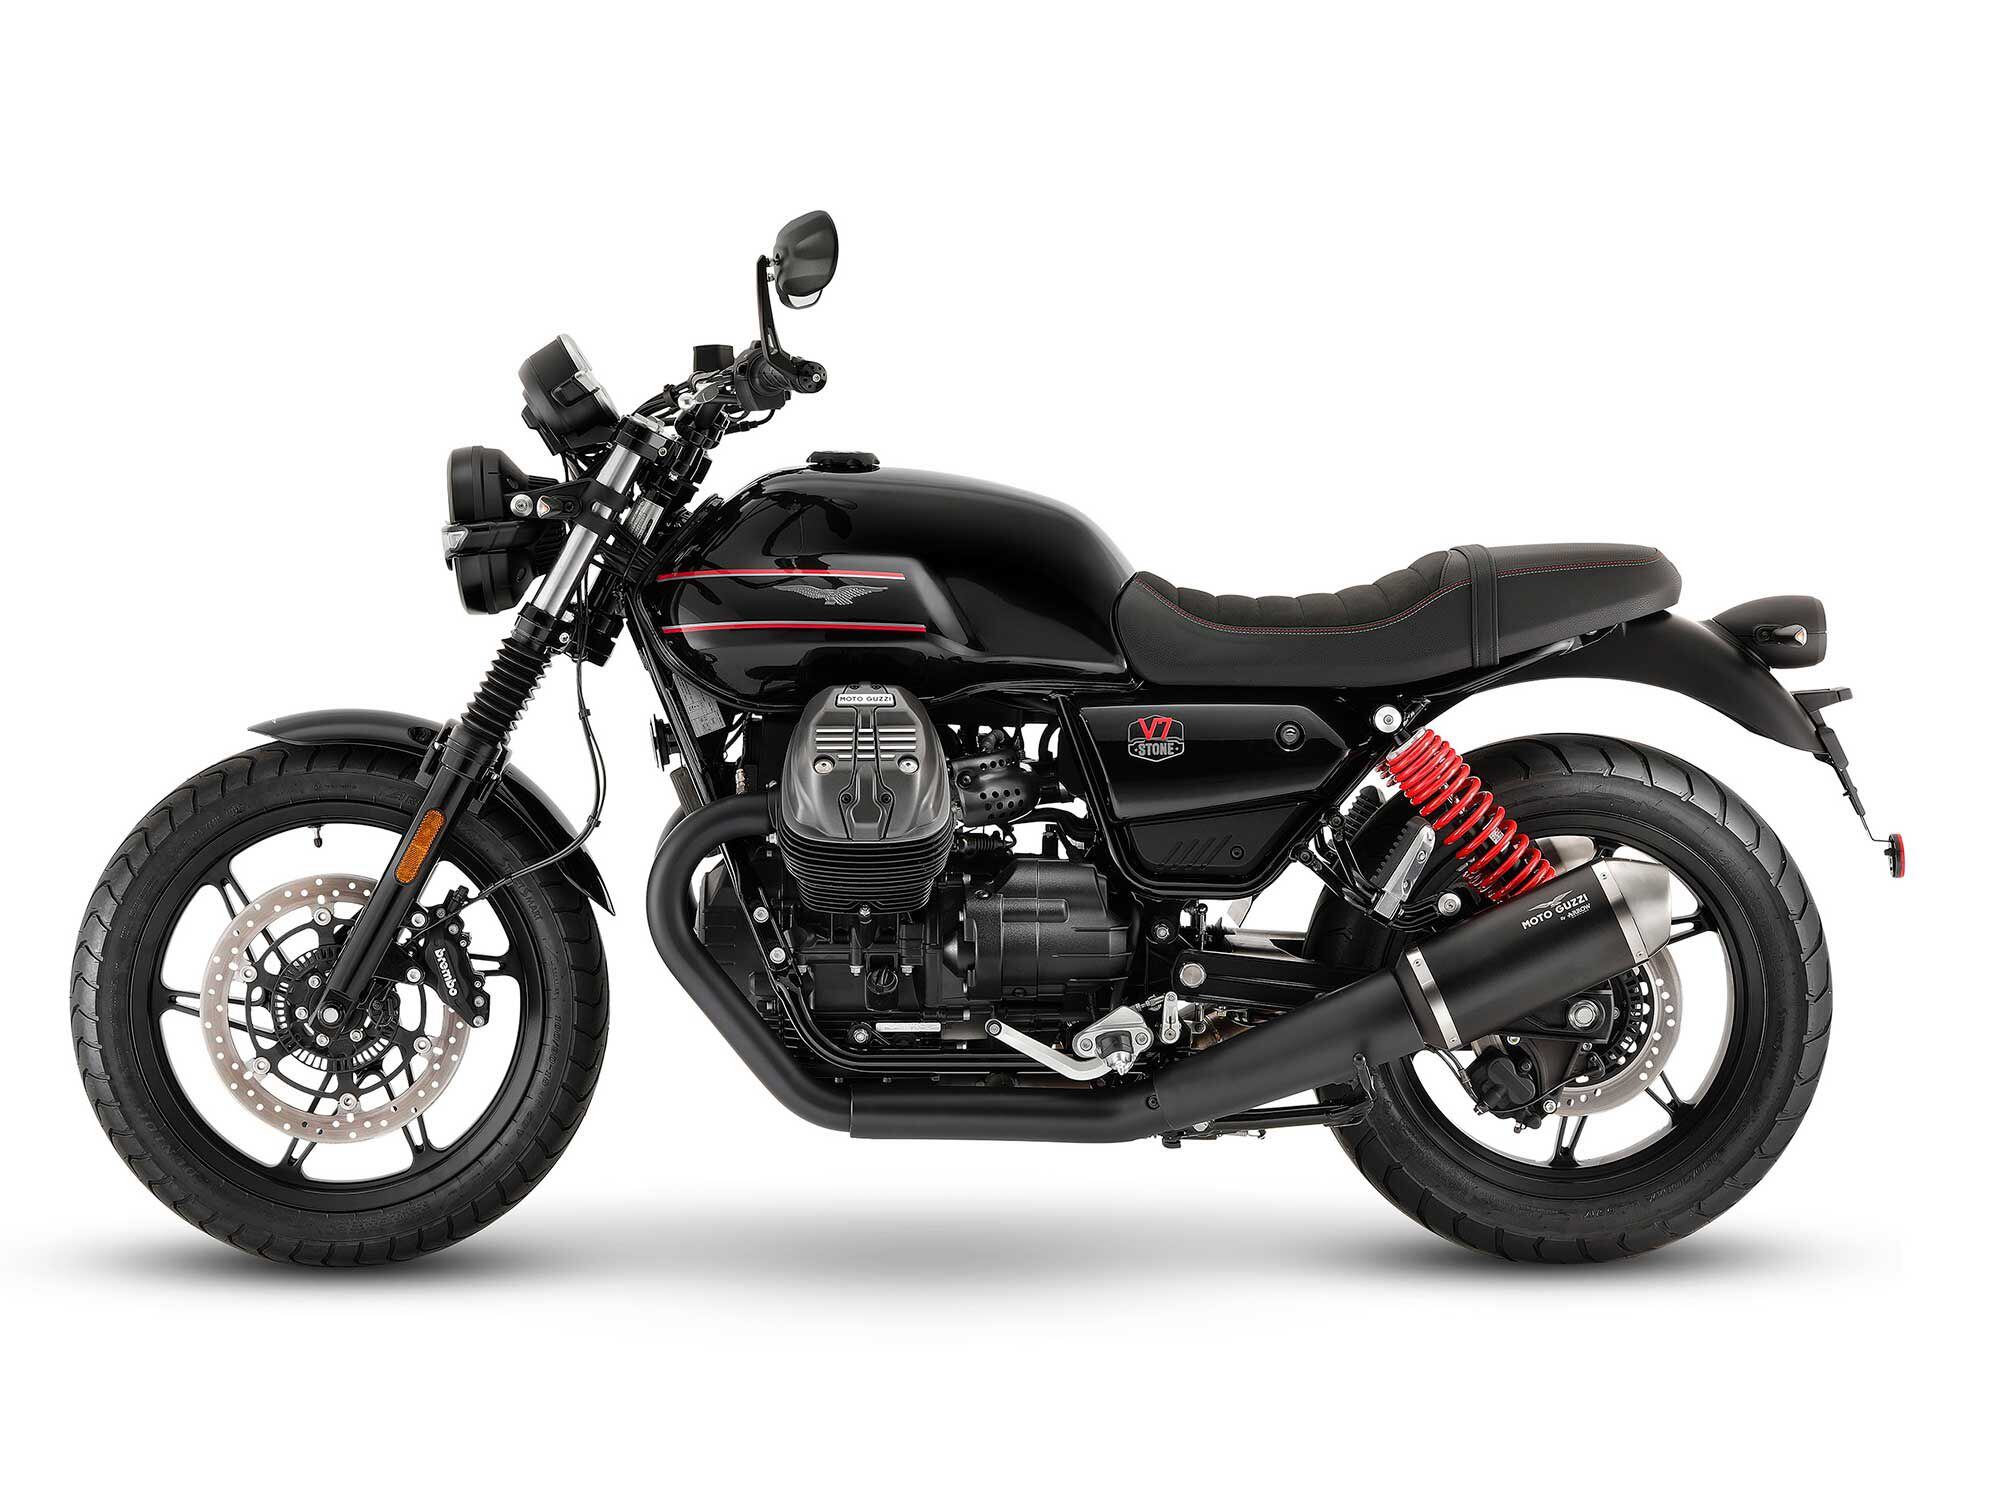 Guzzi’s new V100 may feature liquid-cooling, but the company’s air-cooled twin lives on. The new V7 Stone Special Edition is the latest iteration.